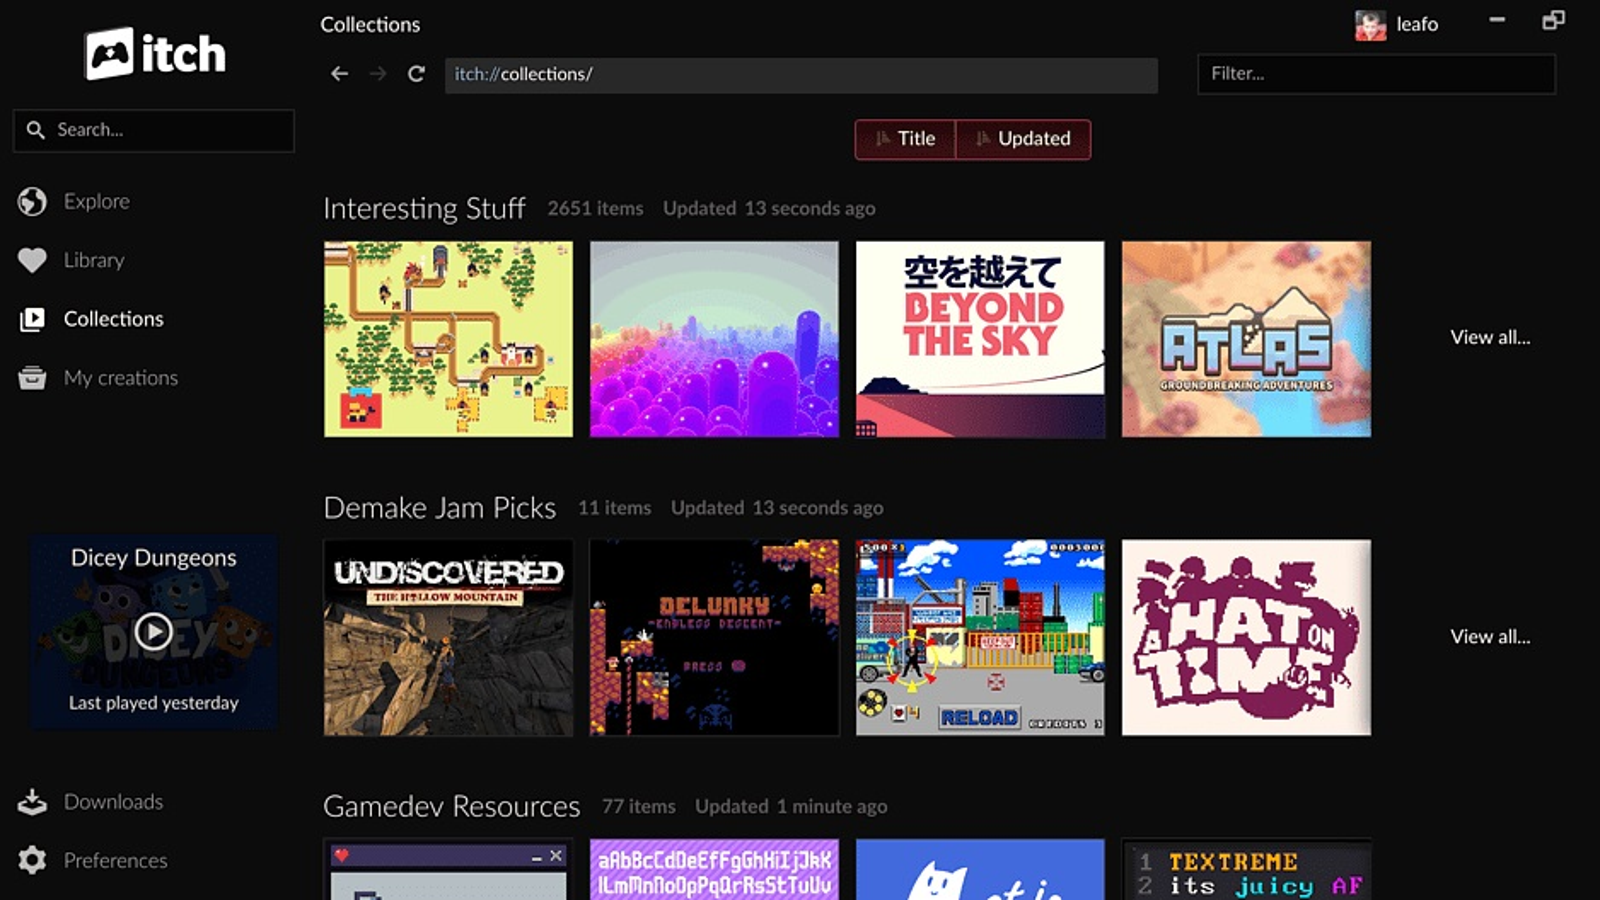 The Epic Games Store will reportedly give away 17 free games over